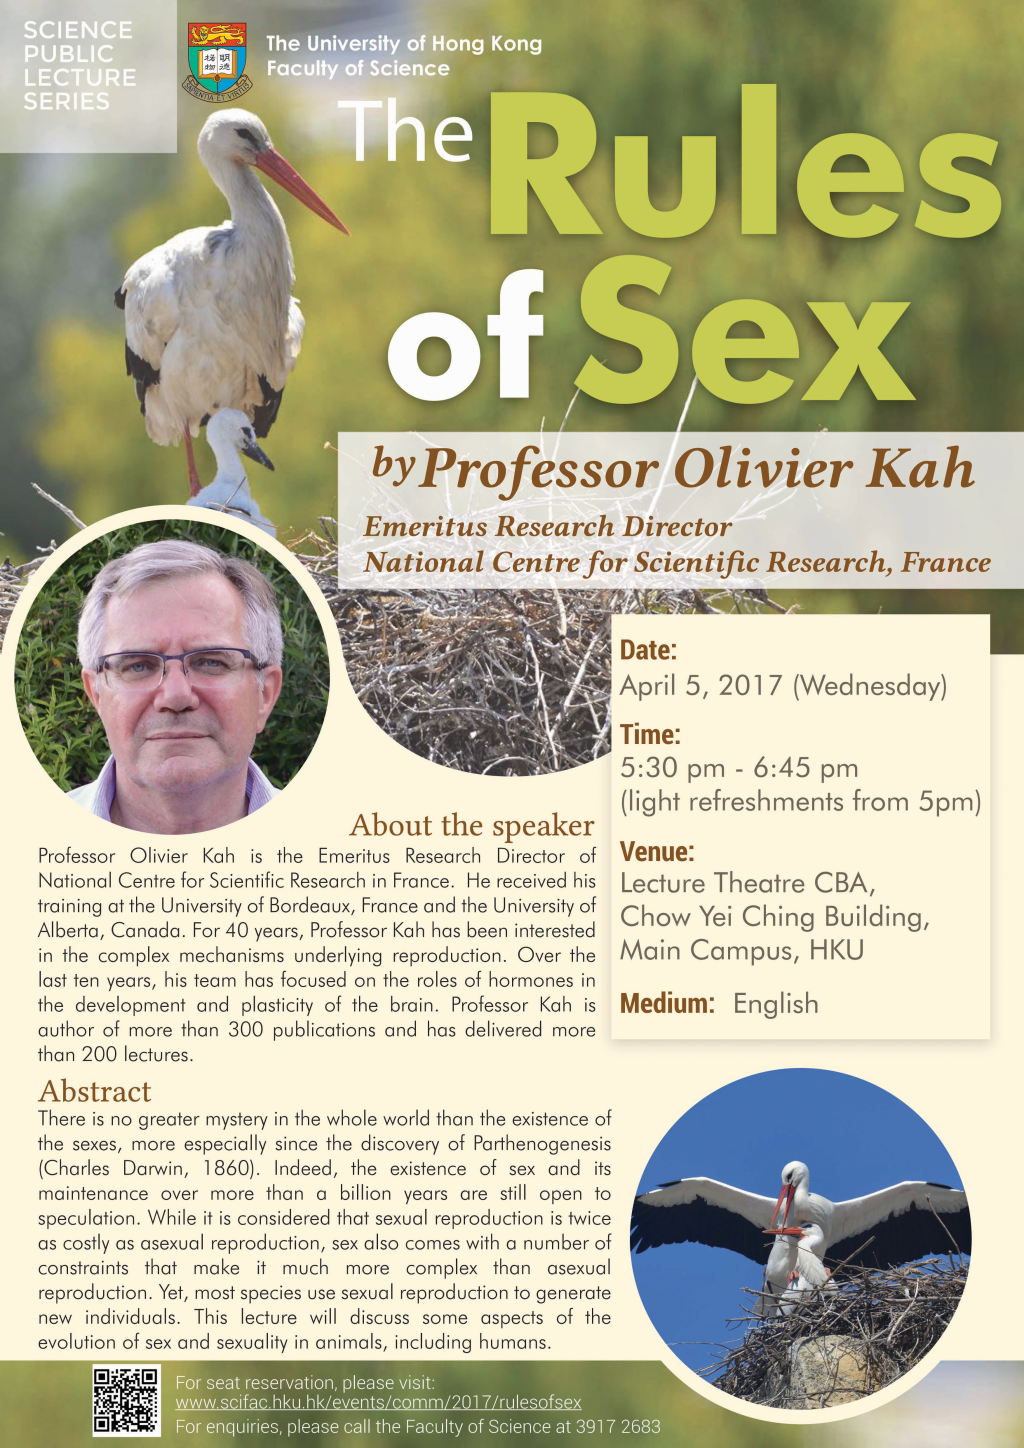 Faculty of Science Public Lecture Series: 